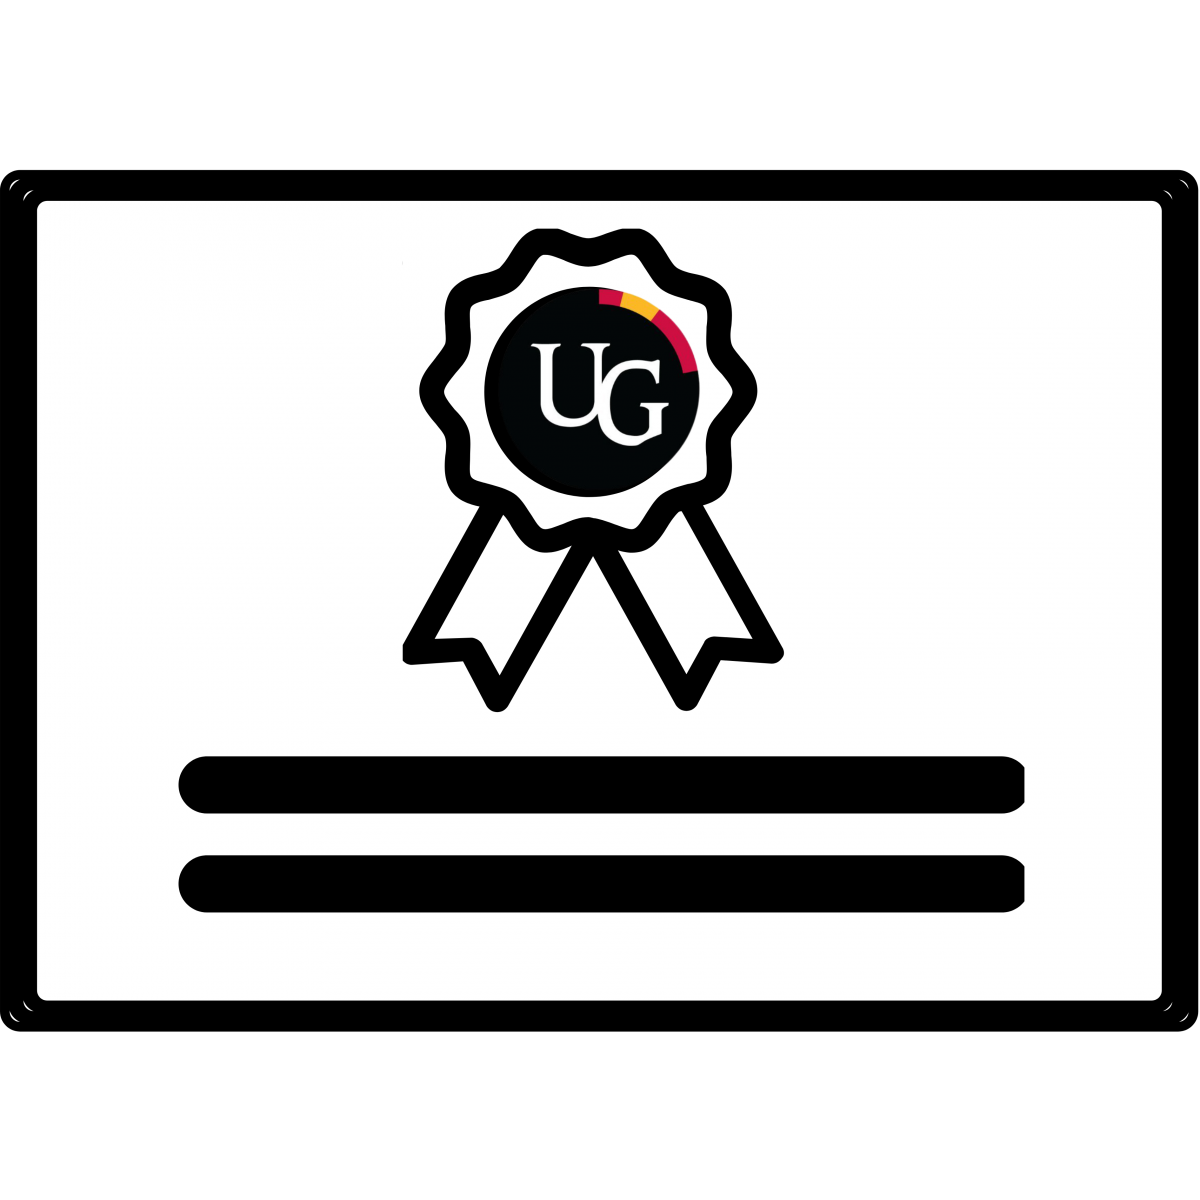 A black certificate award with University of Guelph logo.